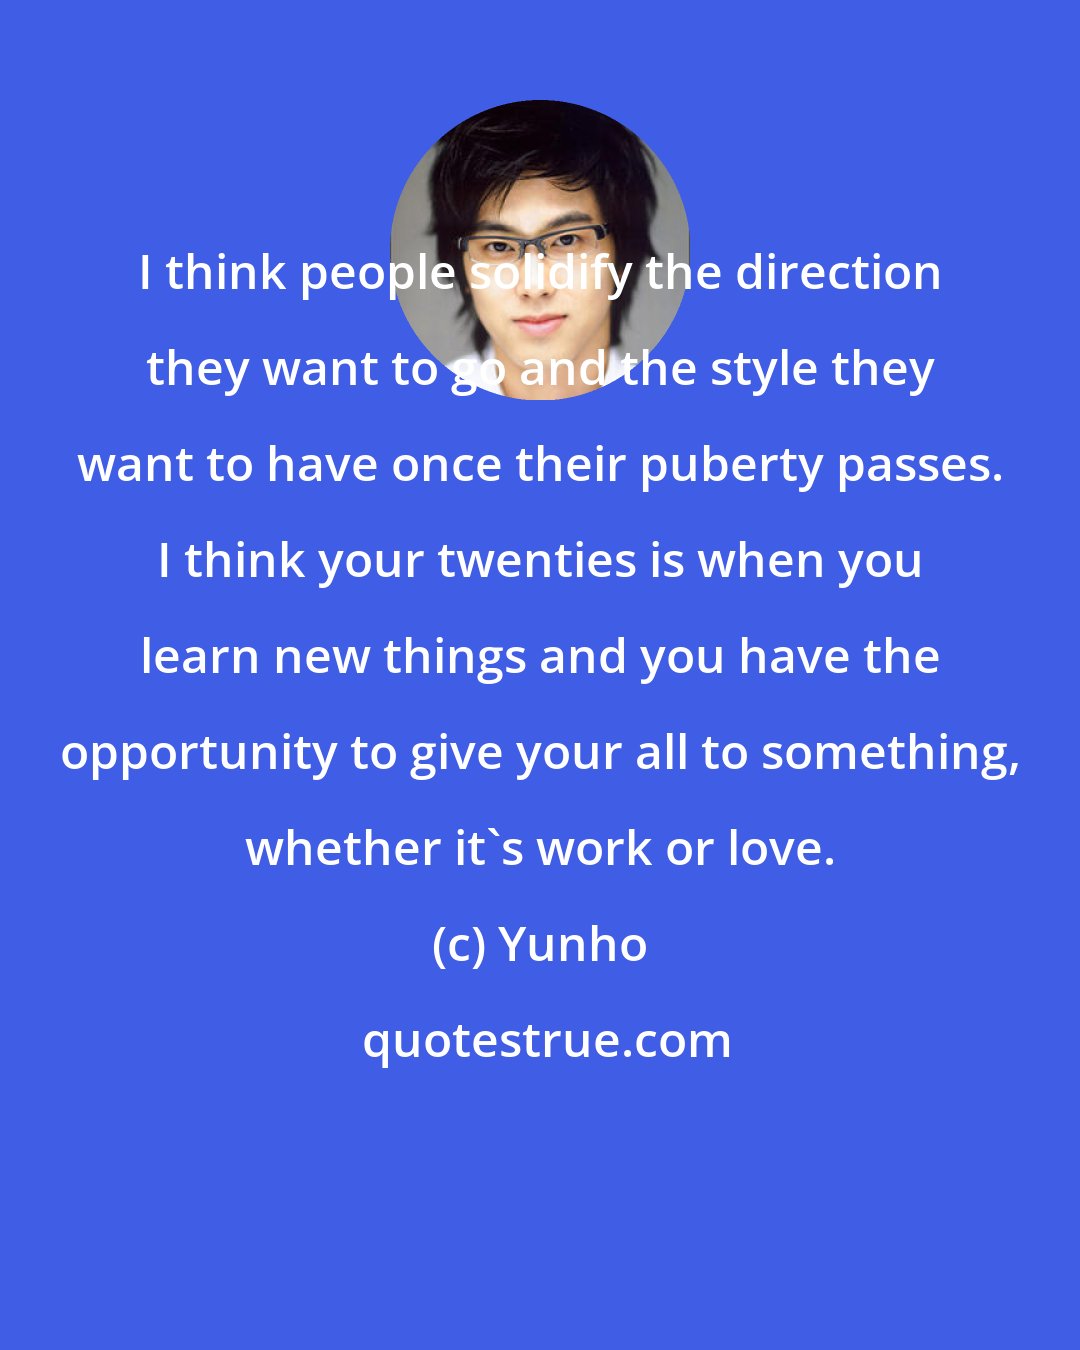 Yunho: I think people solidify the direction they want to go and the style they want to have once their puberty passes. I think your twenties is when you learn new things and you have the opportunity to give your all to something, whether it's work or love.